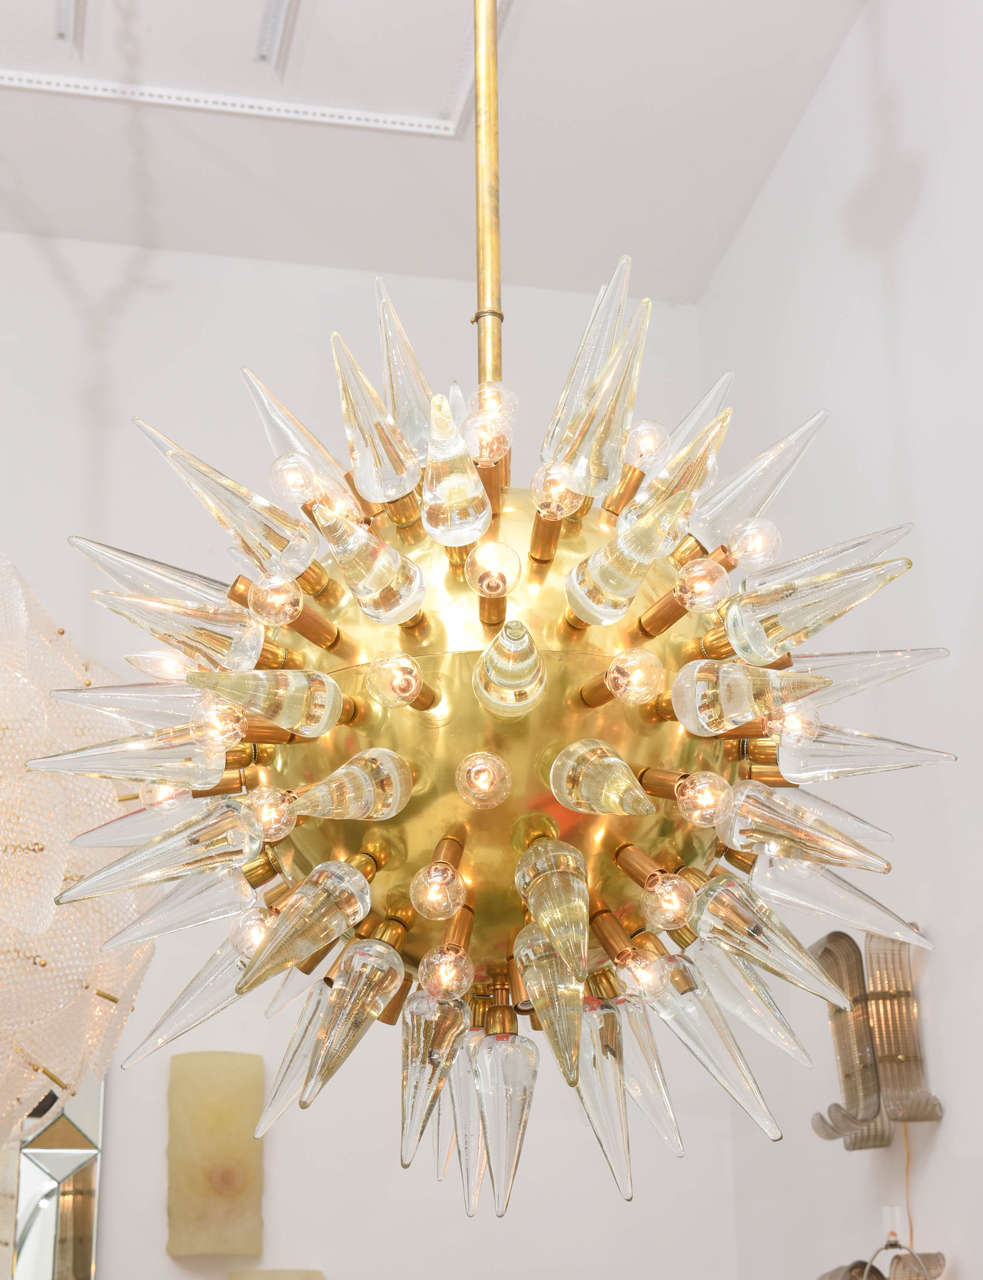 Monumental Italian brass chandelier with thick clear glass spikes punctuating the brass sphere. The starburst fixture is wired and working and has multiple sockets each housing circular bulbs with candelabra sockets.